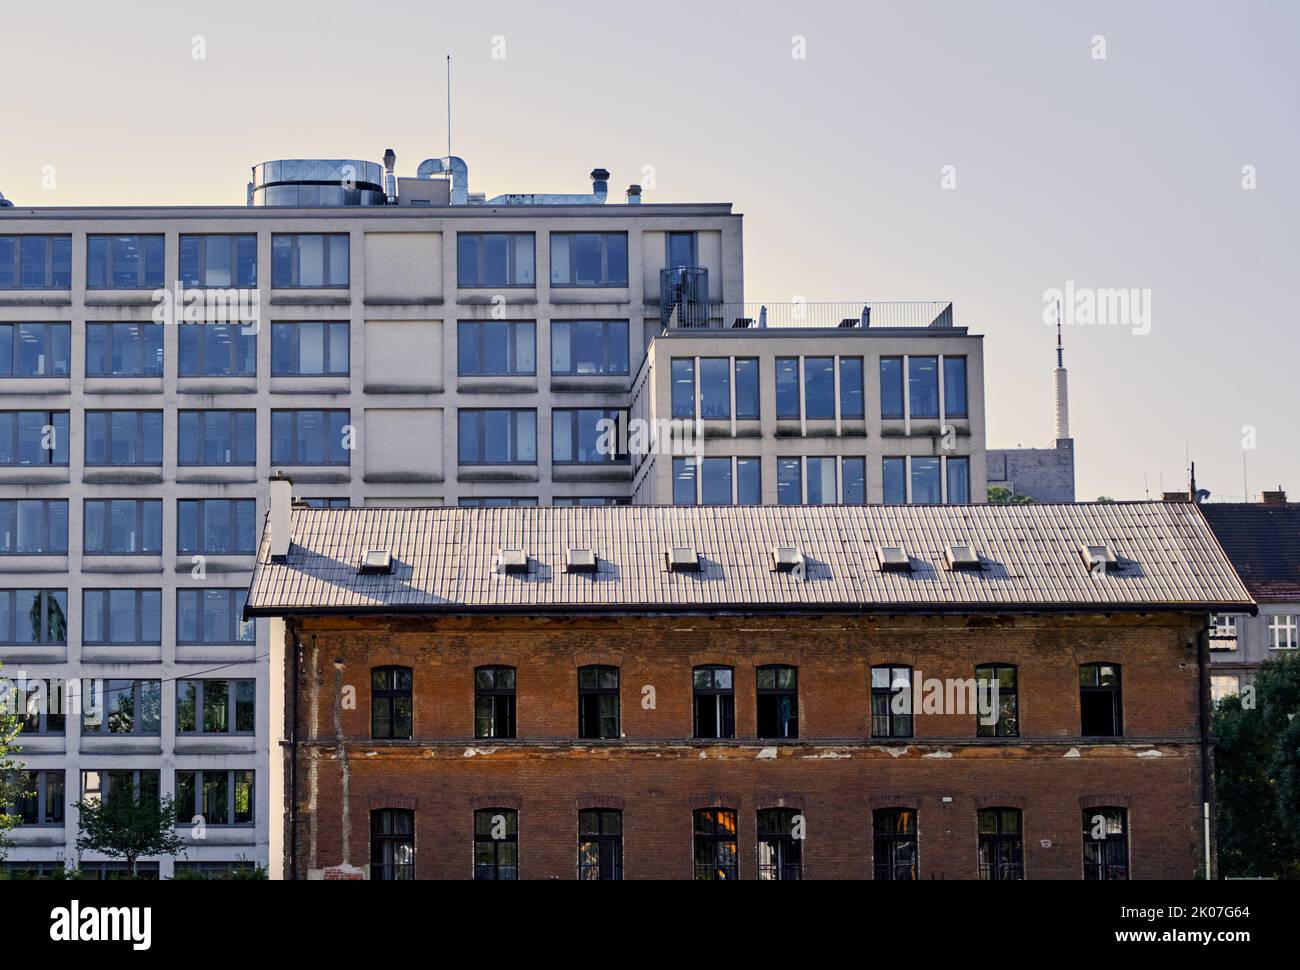 Empty demolition brick house in front of a modern residential building and concrete office building, contrasting architecture Stock Photo